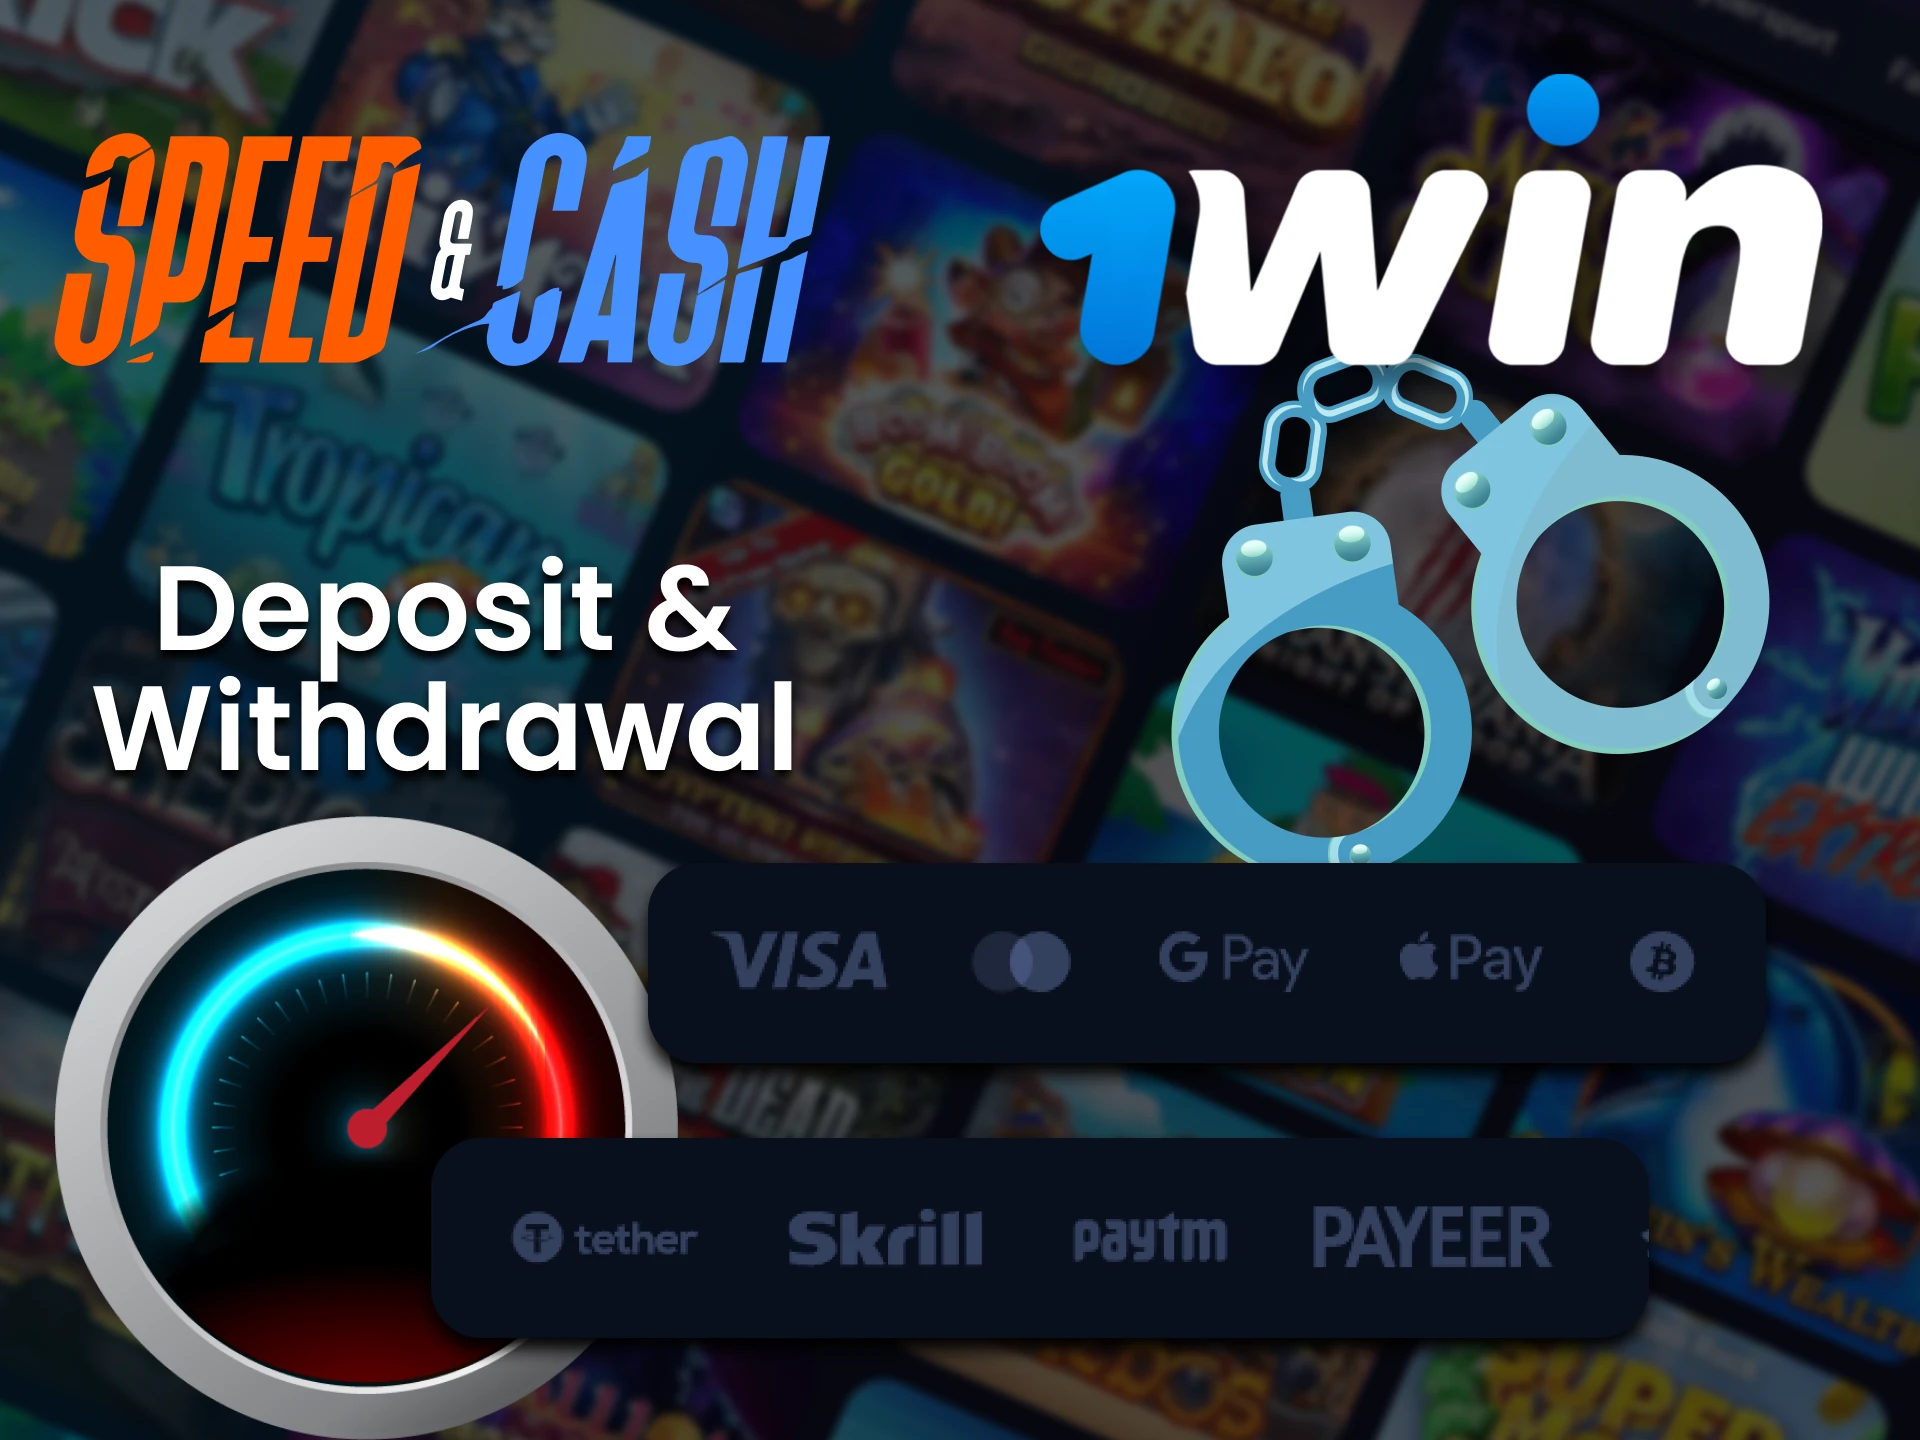 There are lots of payment systems available for 1Win Speed & Cash deposits and withdrawals.